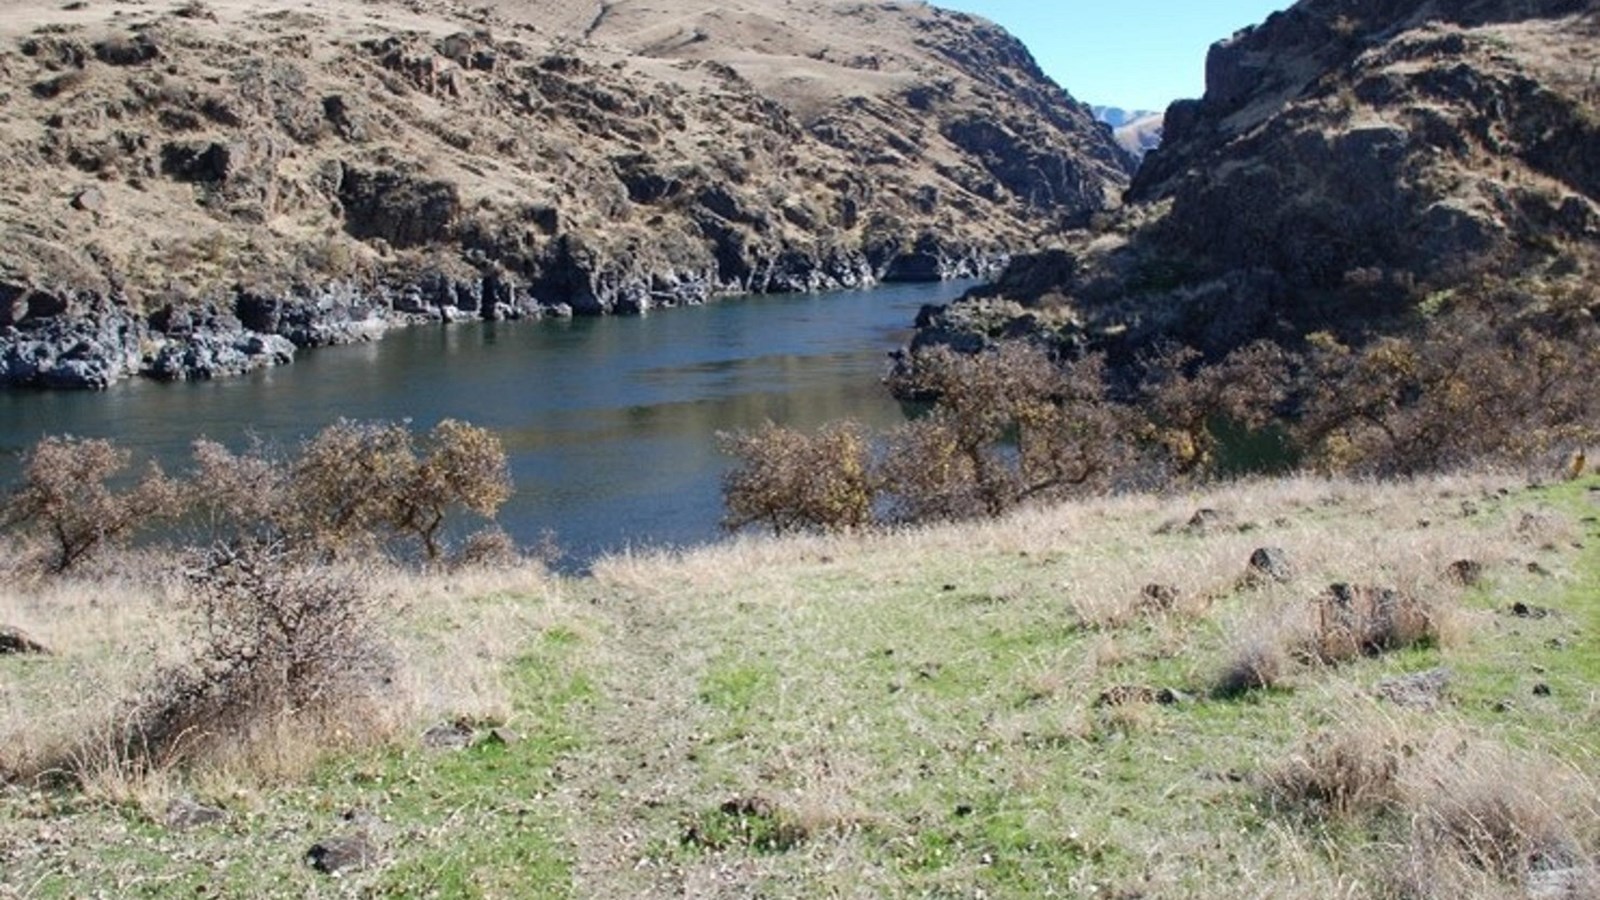 Snake River crossing site with rocky river banks